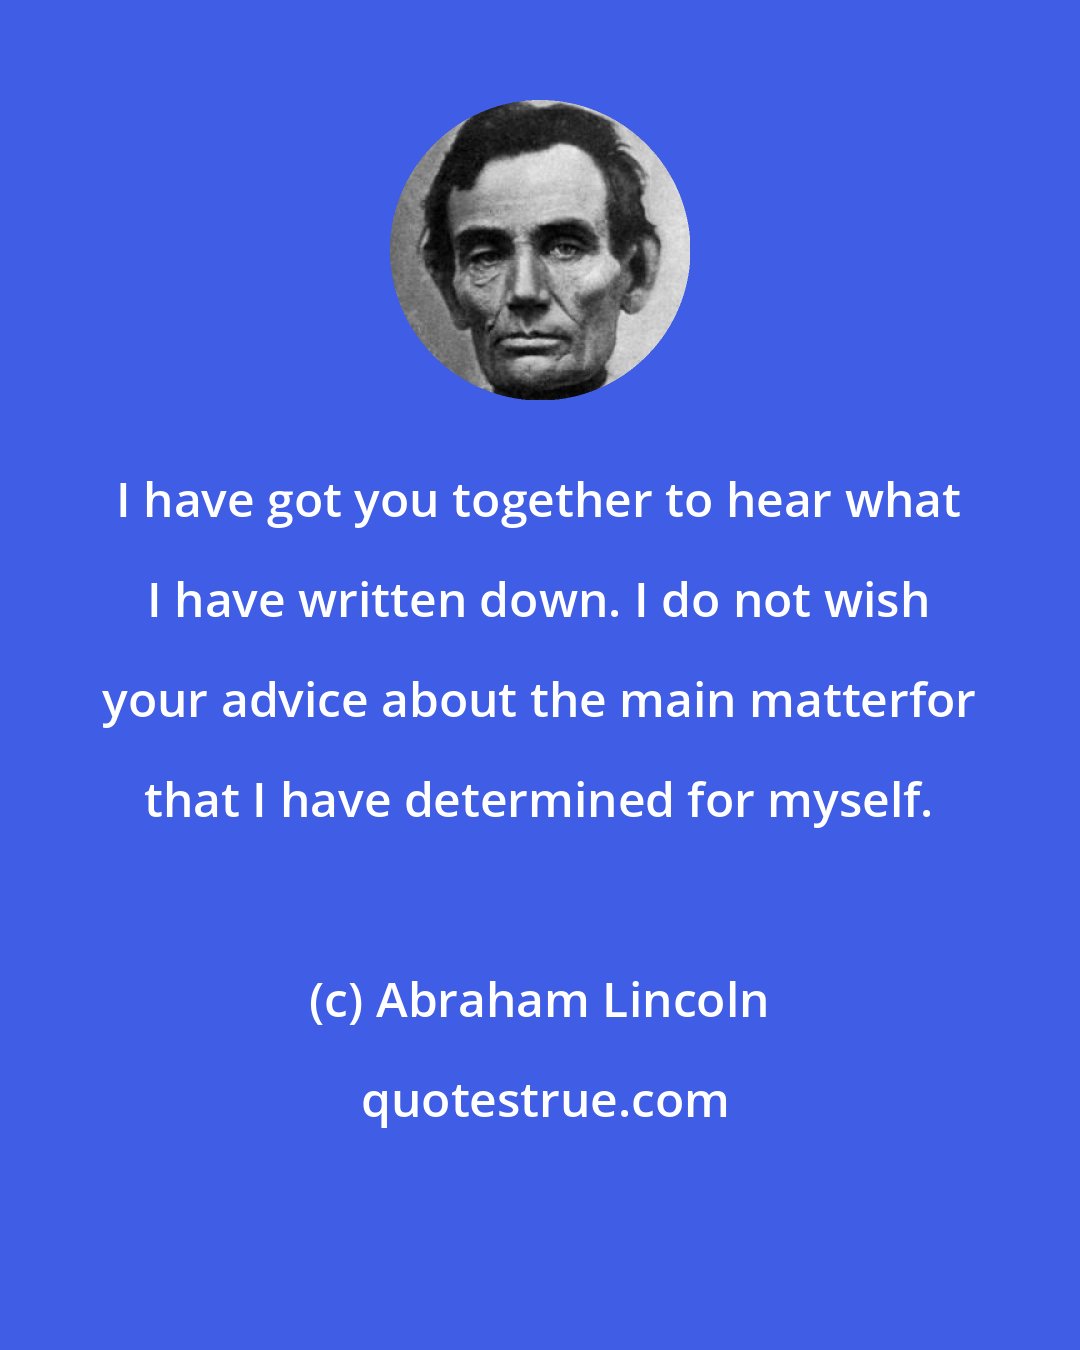 Abraham Lincoln: I have got you together to hear what I have written down. I do not wish your advice about the main matterfor that I have determined for myself.